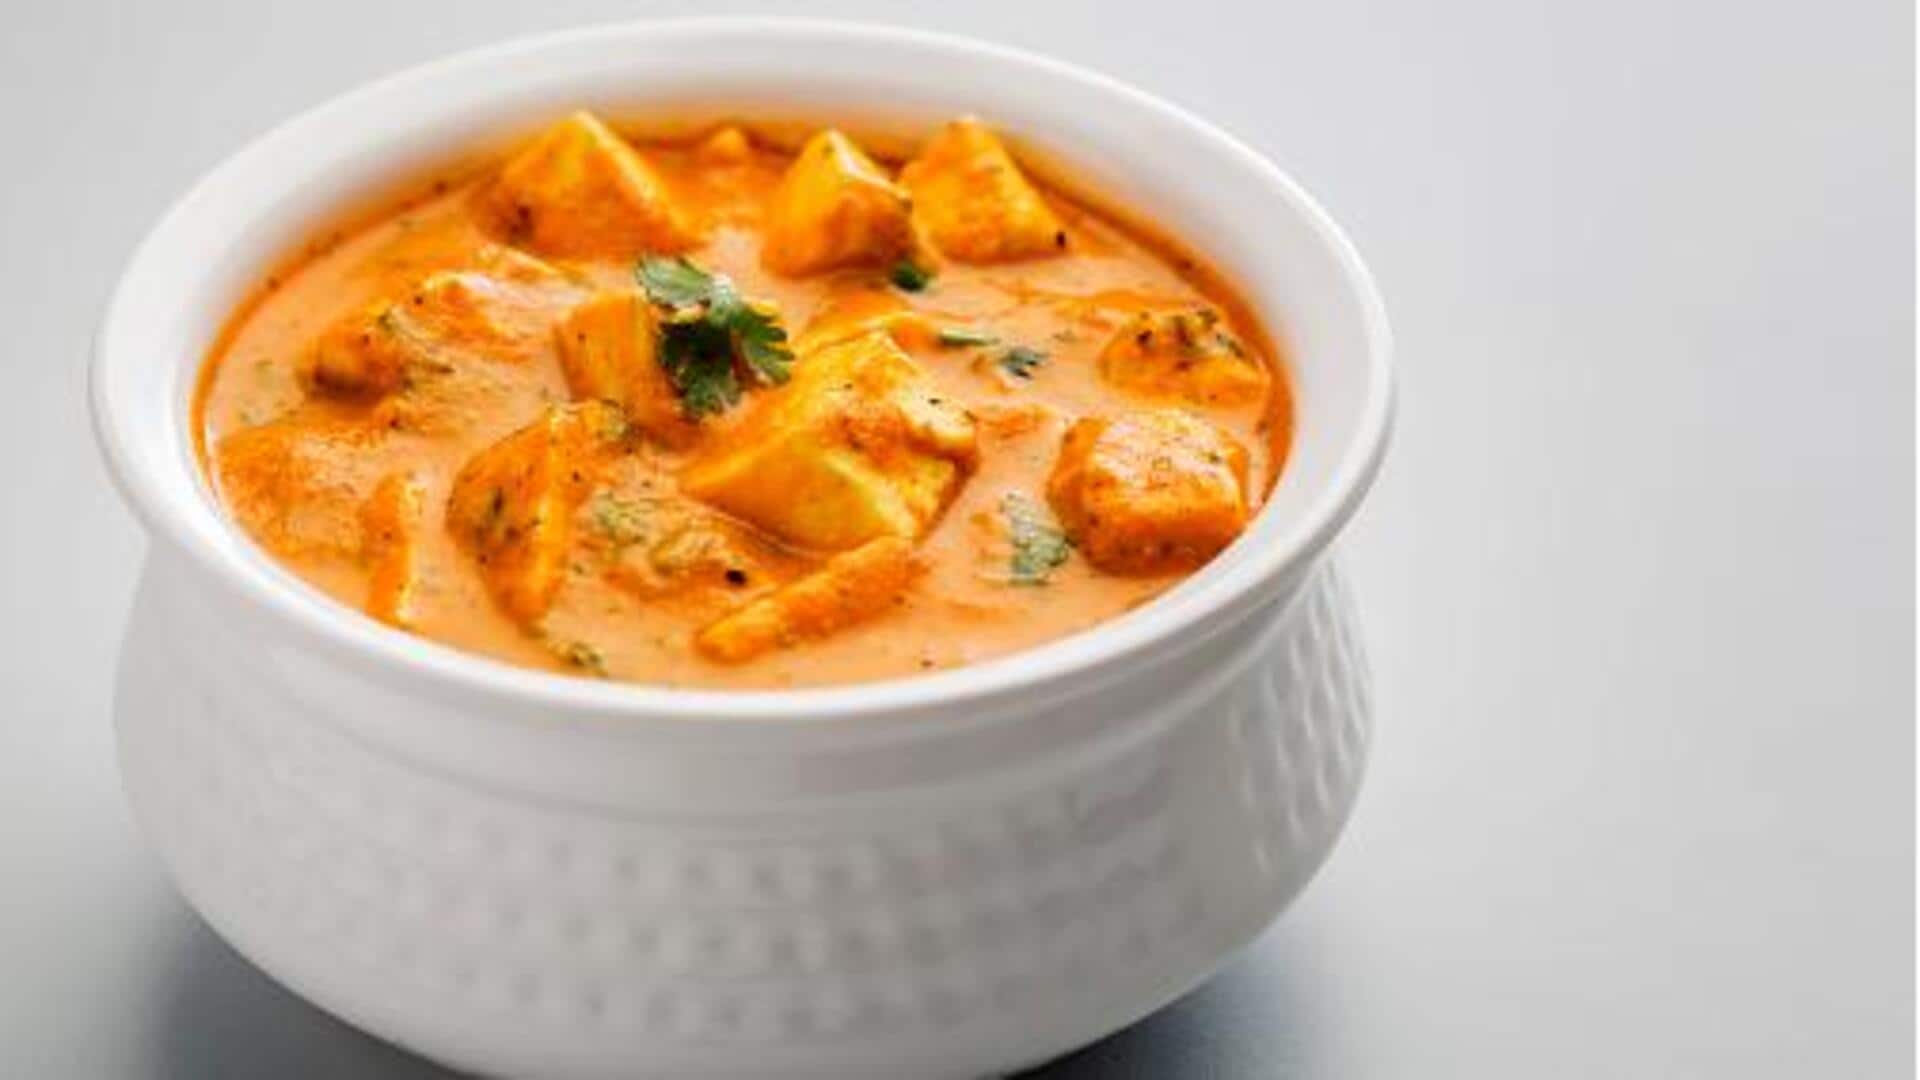 This 'royal shahi paneer' recipe will leave your guests impressed